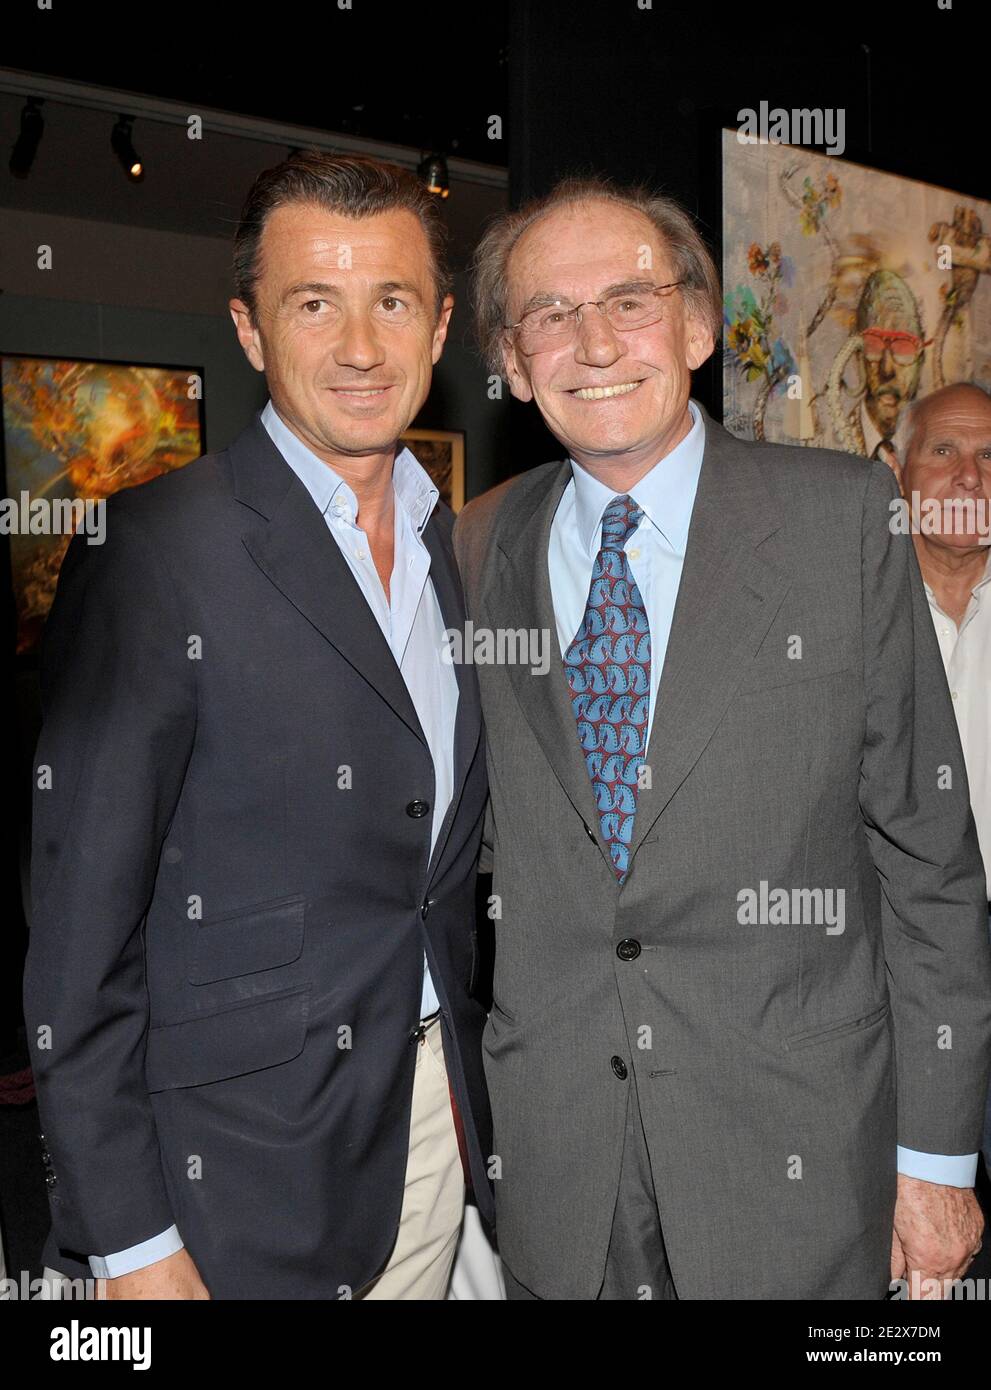 Francois and Pal Sarkozy attending the opening of the 'Entente Subtile' painting exhibition by Pal Sarkozy and Werner Hornung at the Espace Pierre Cardin in Paris, France, on April 24, 2010. Photo by Giancarlo Gorassini/ABACAPRESS.COM Stock Photo